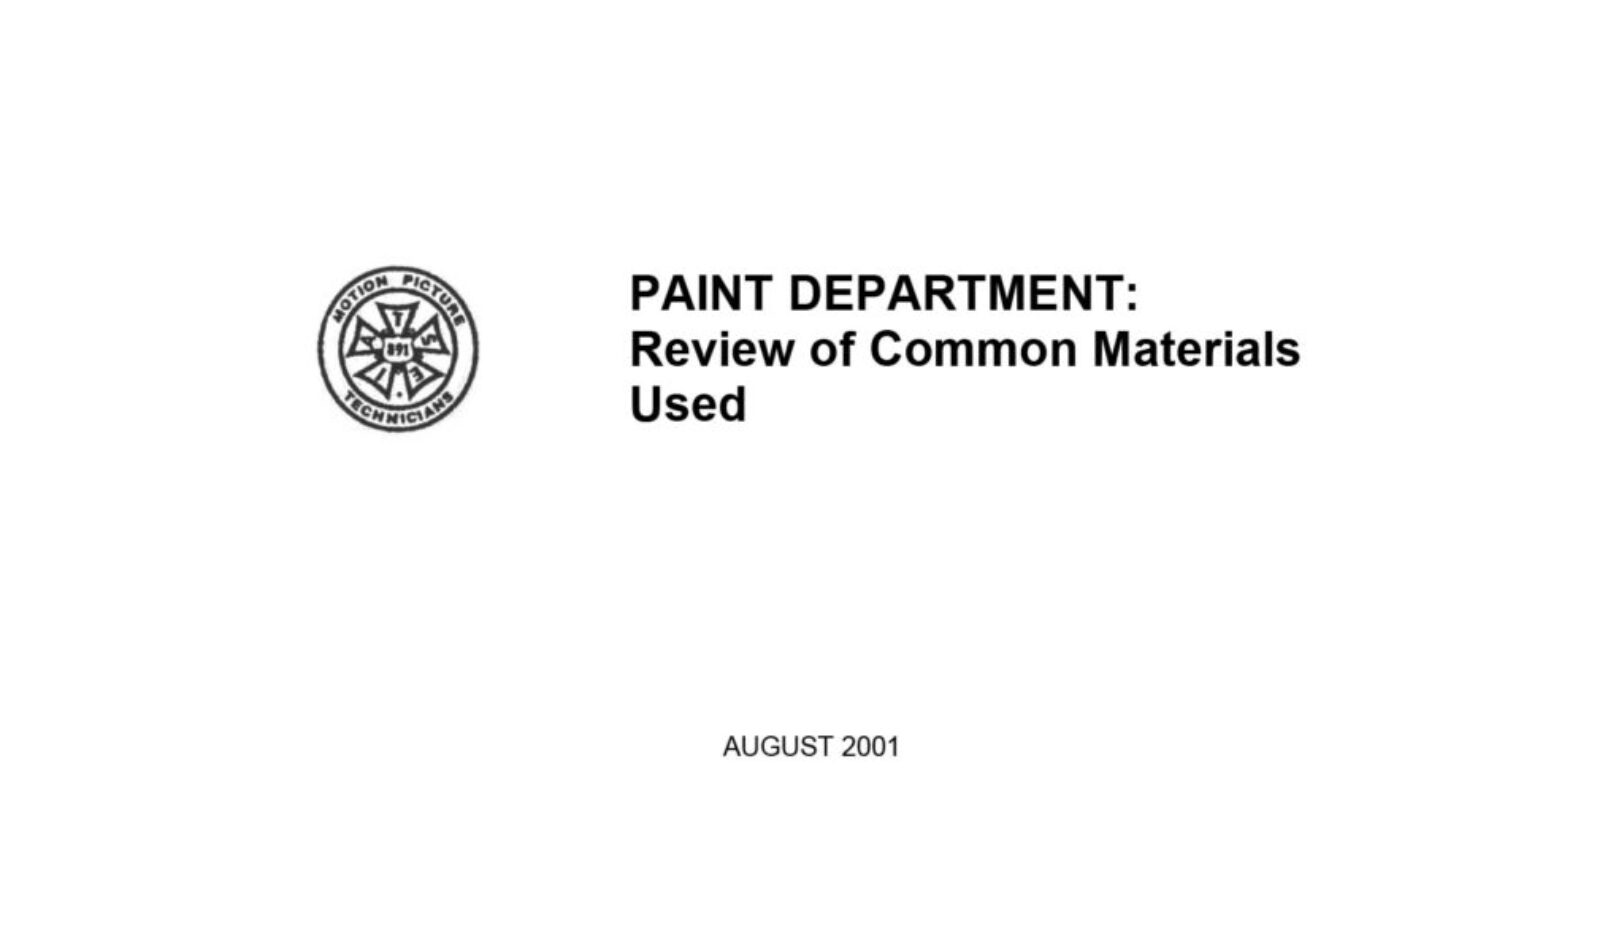 Paint Department, Review of Common Materials Used Report